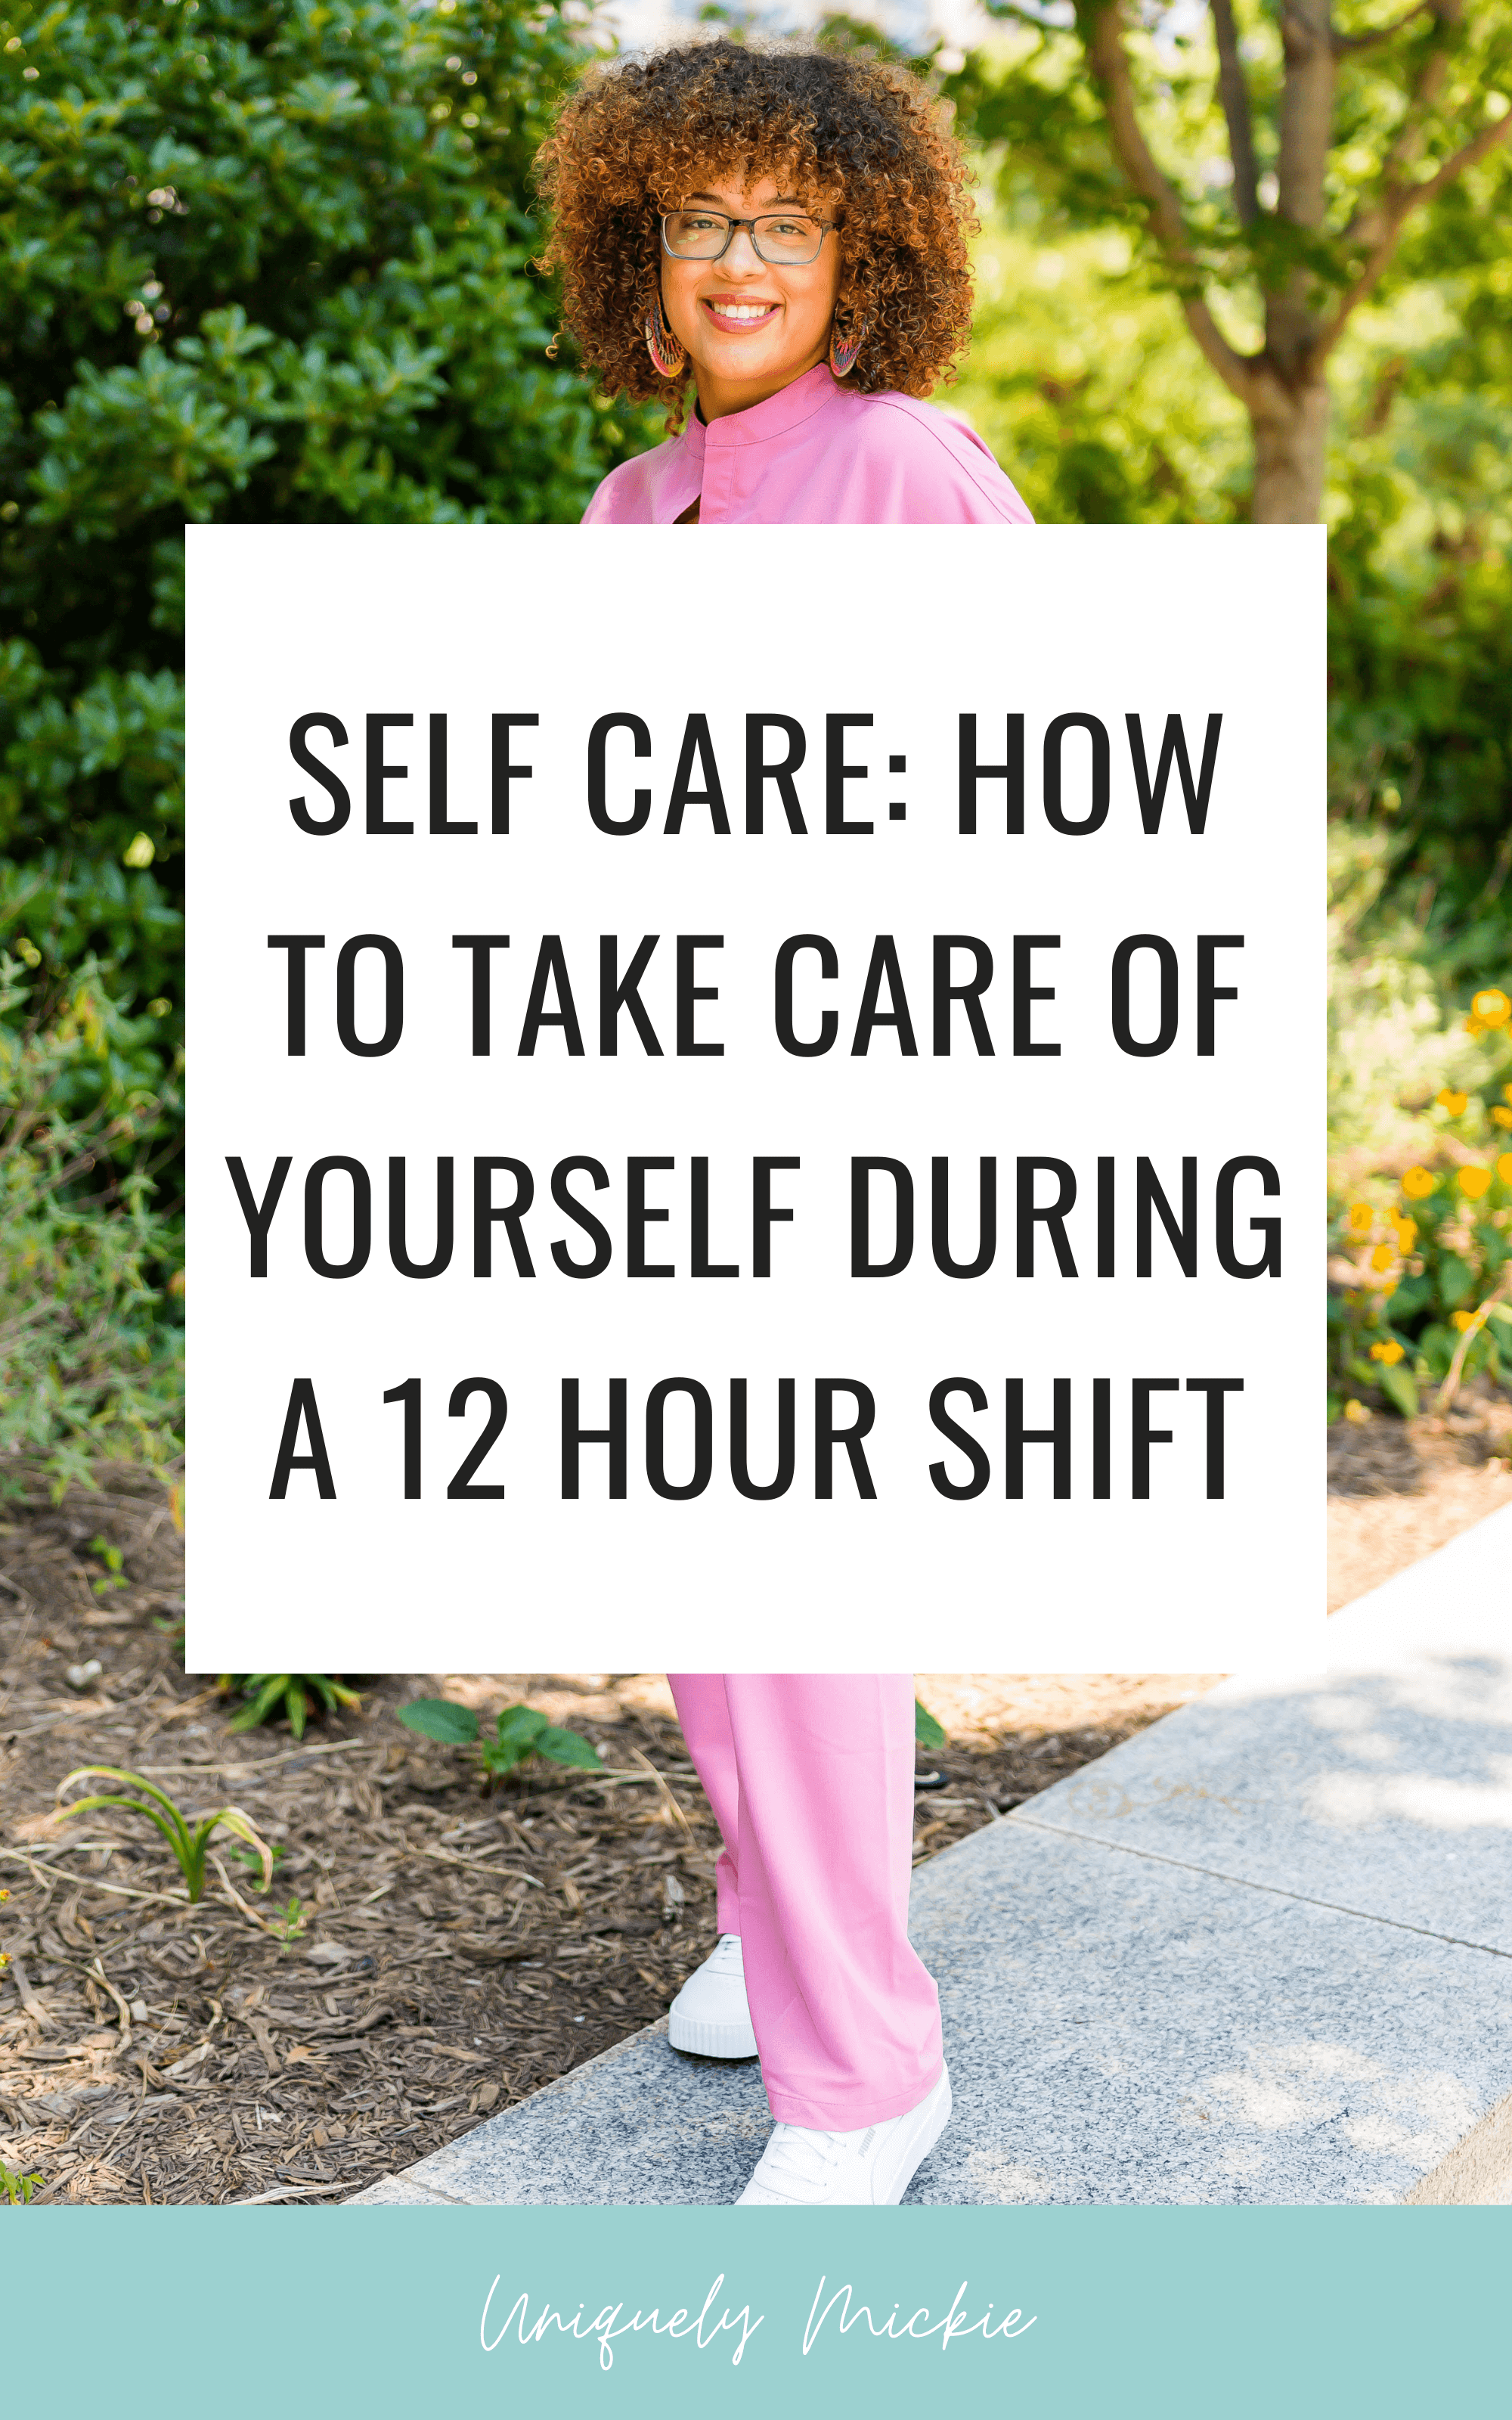 Pharmacist Health: 10 Tips for Surviving 12 Hour Shifts